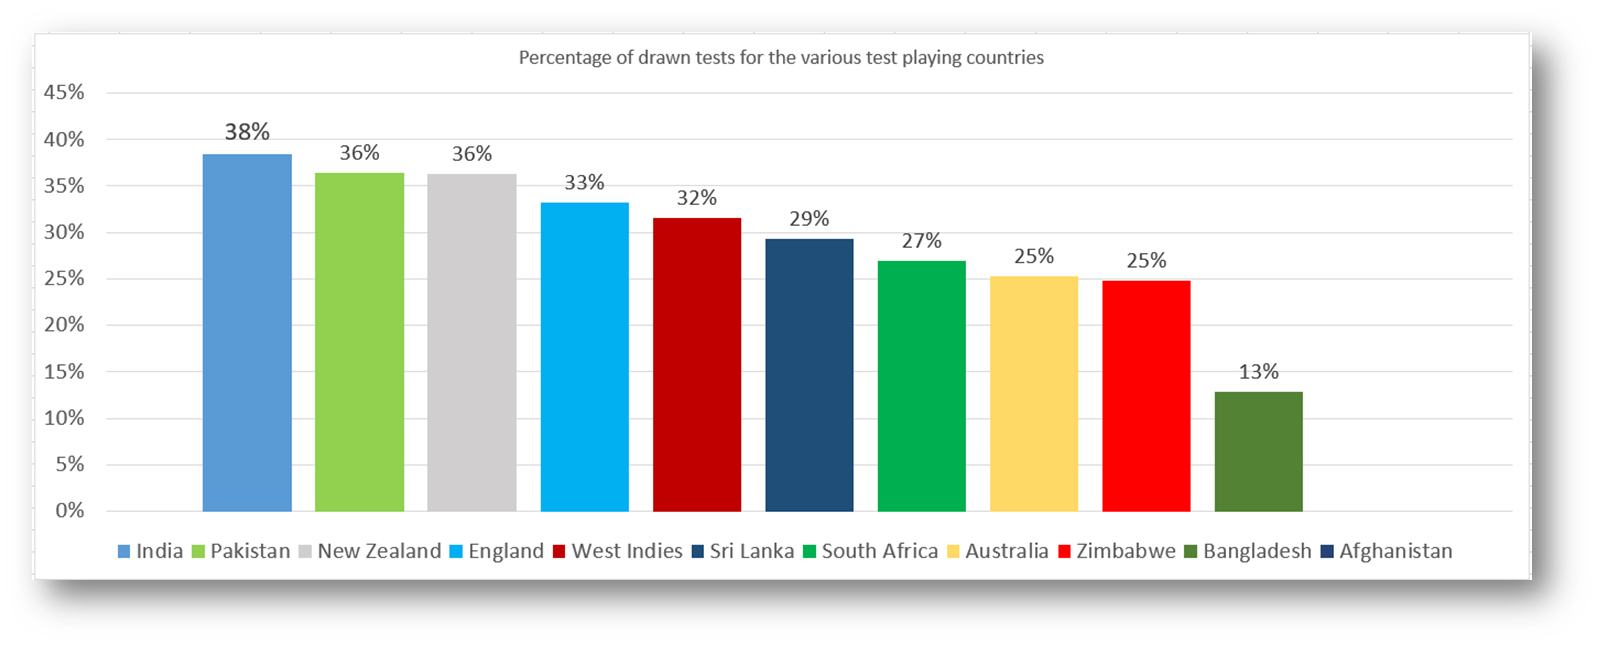 Percentage of drawn test for the various test playing countries